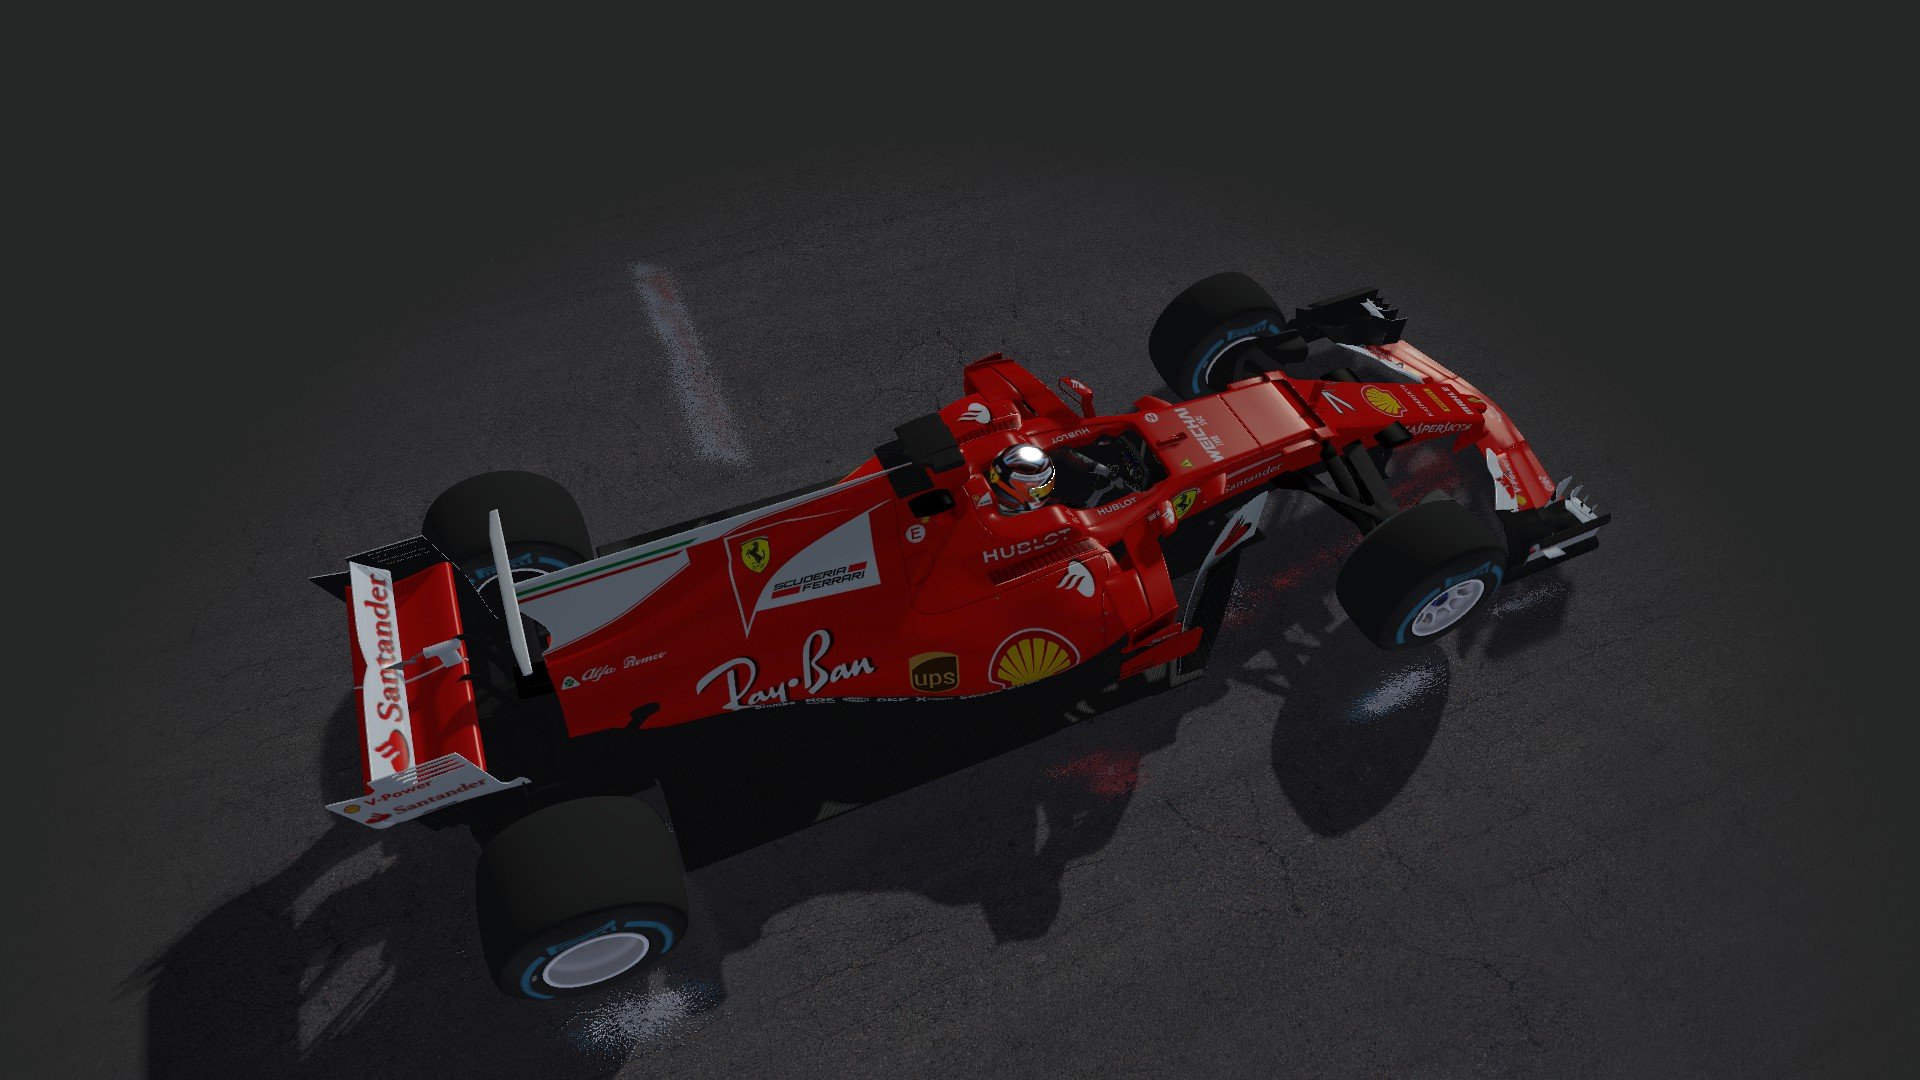 More information about "rFactor 2: F1 2017 Mod by ACFL - Apex"